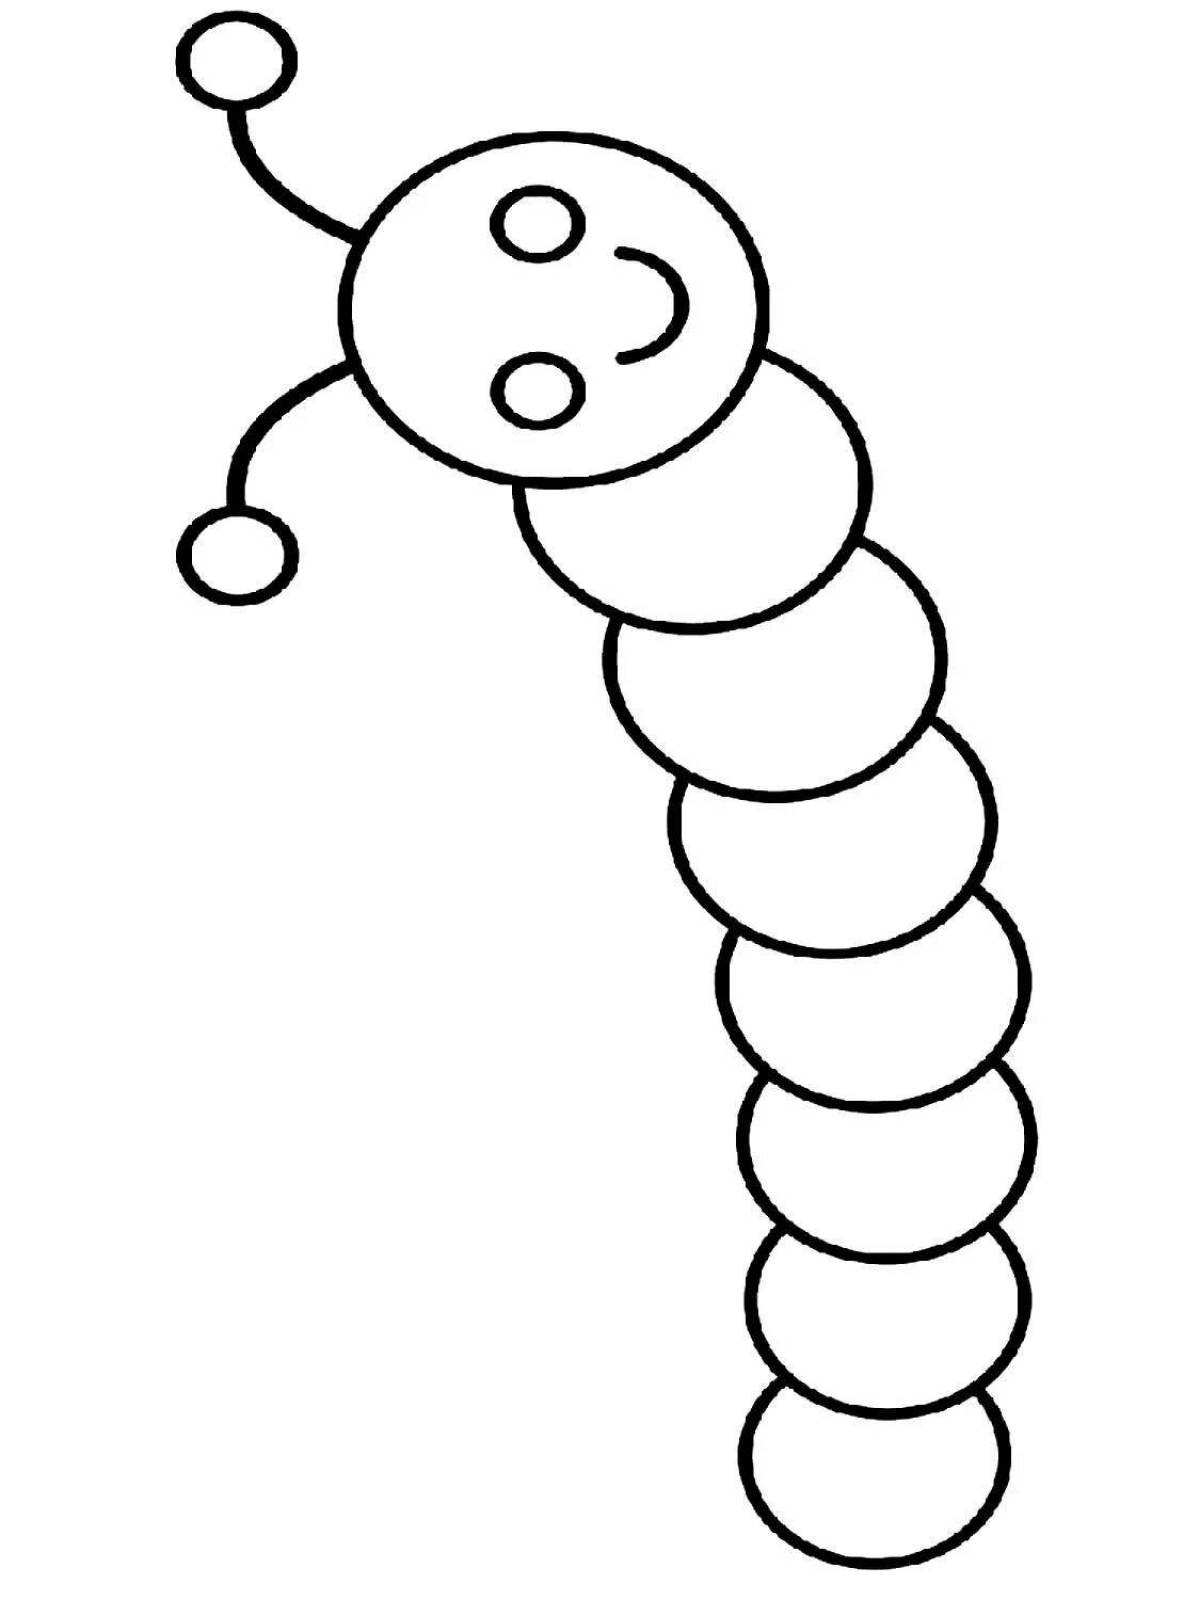 Colorful caterpillar coloring page for little ones